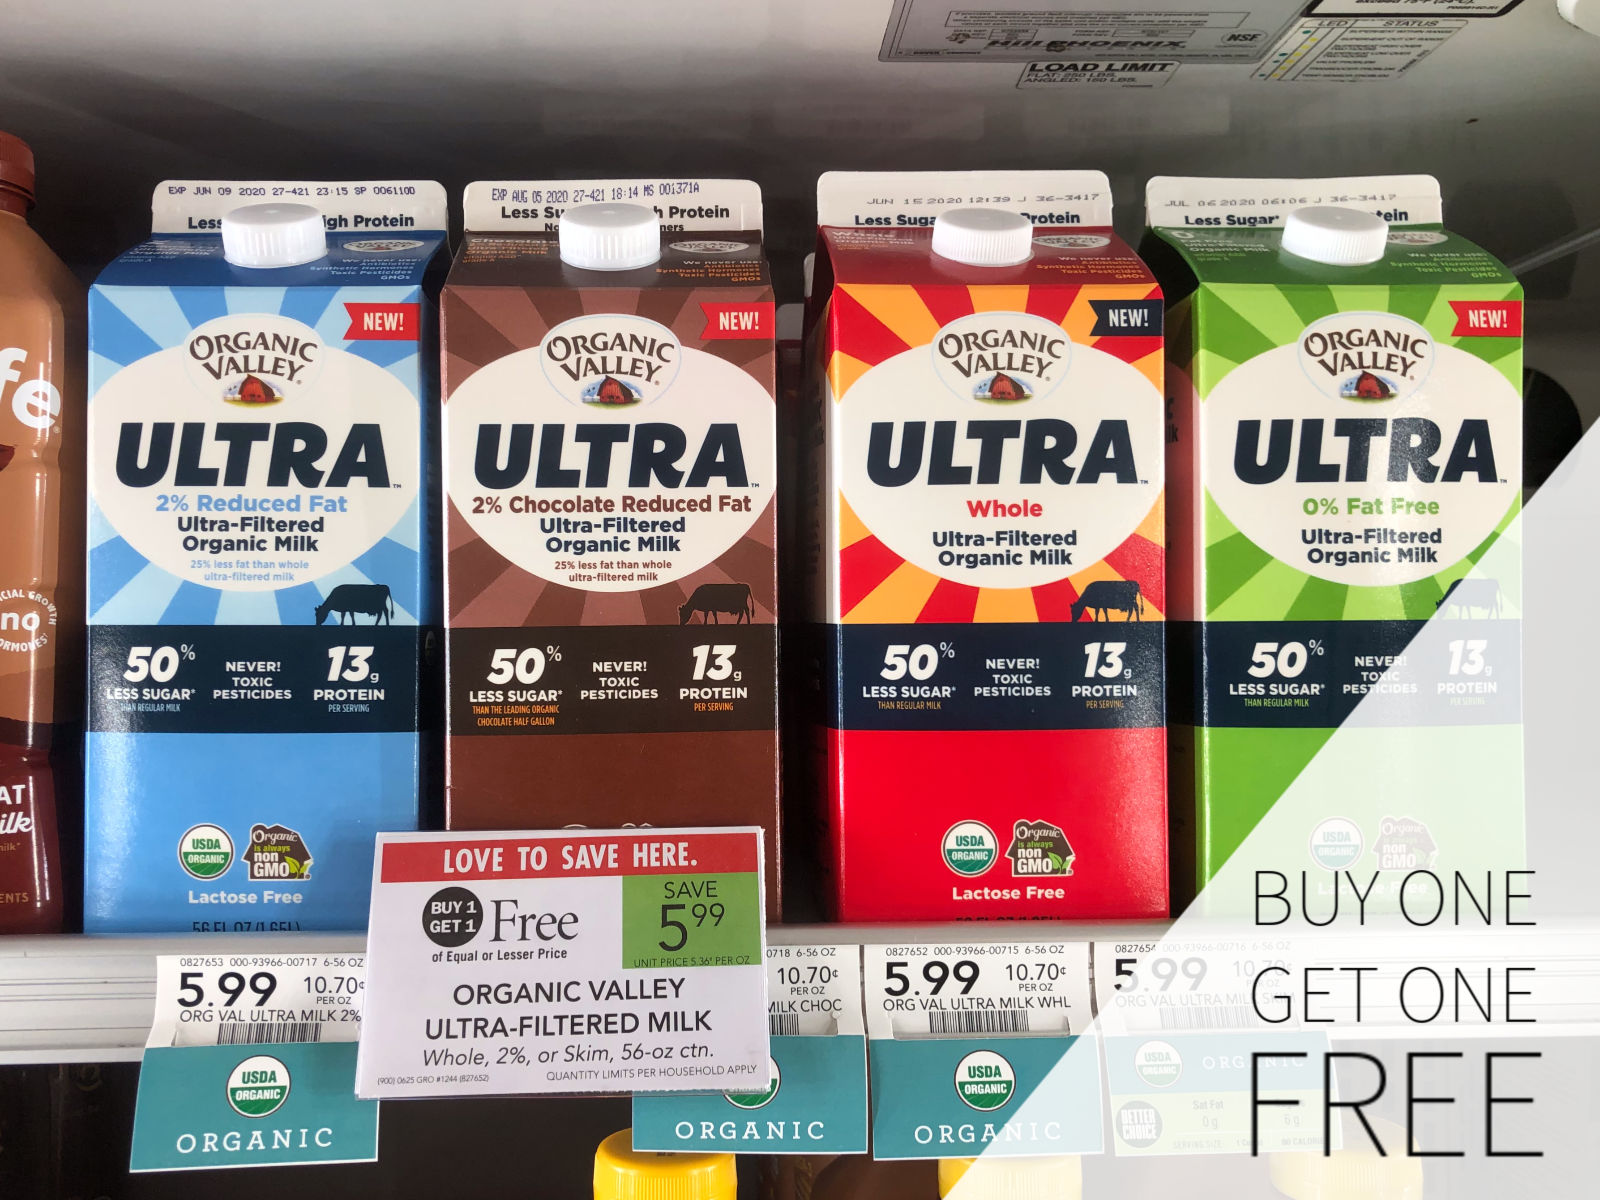 Still Time To Grab Great Tasting Organic Valley Ultra During The BOGO Sale At Publix!